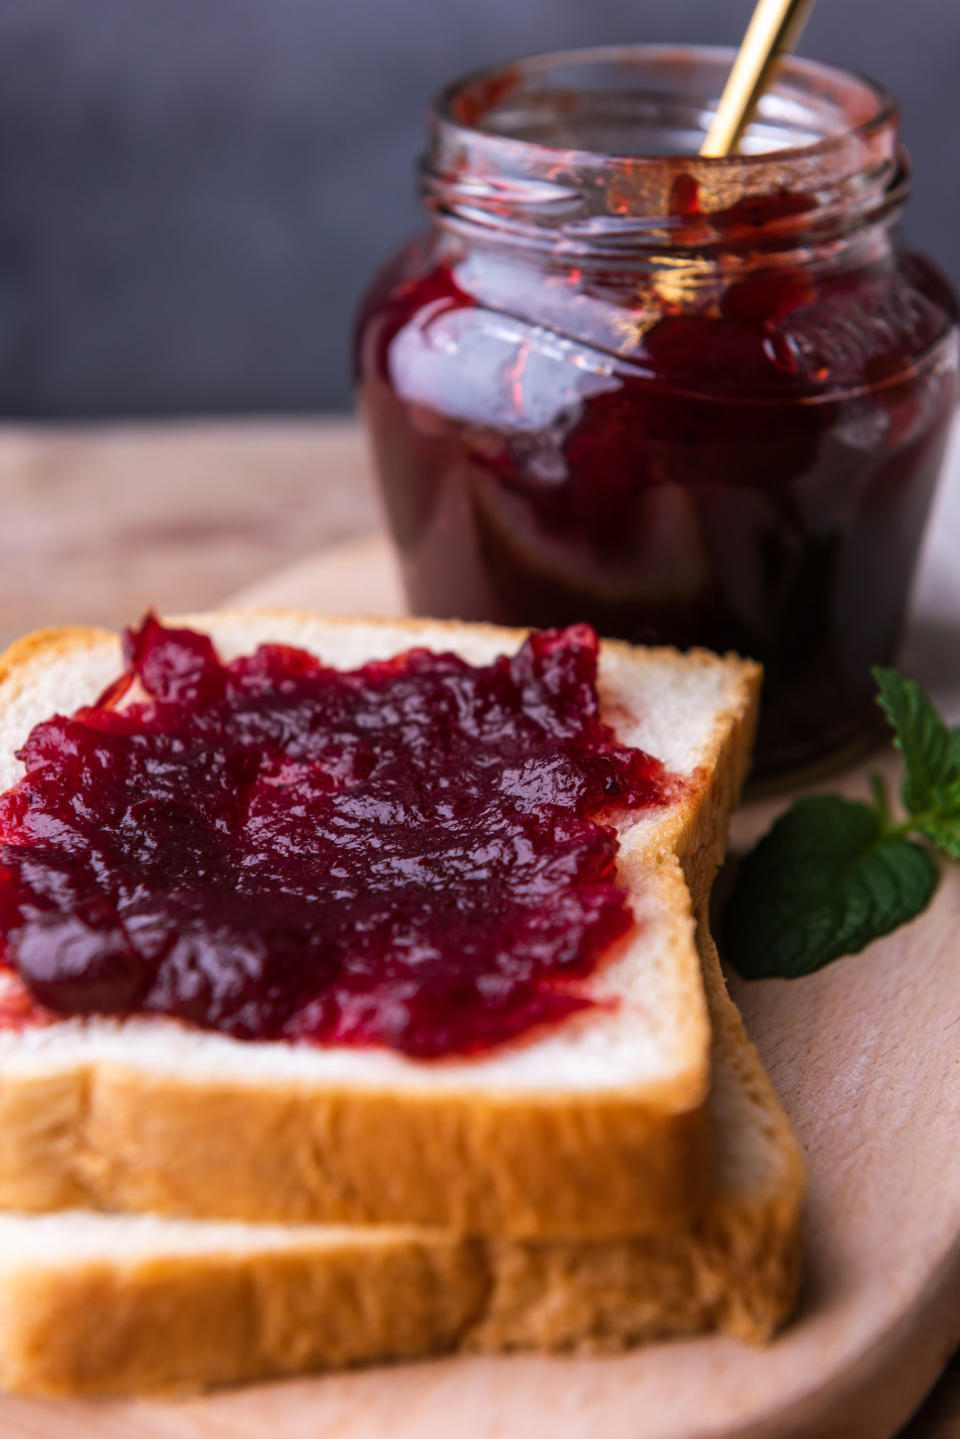 Sandwich with white bread and cranberry jam